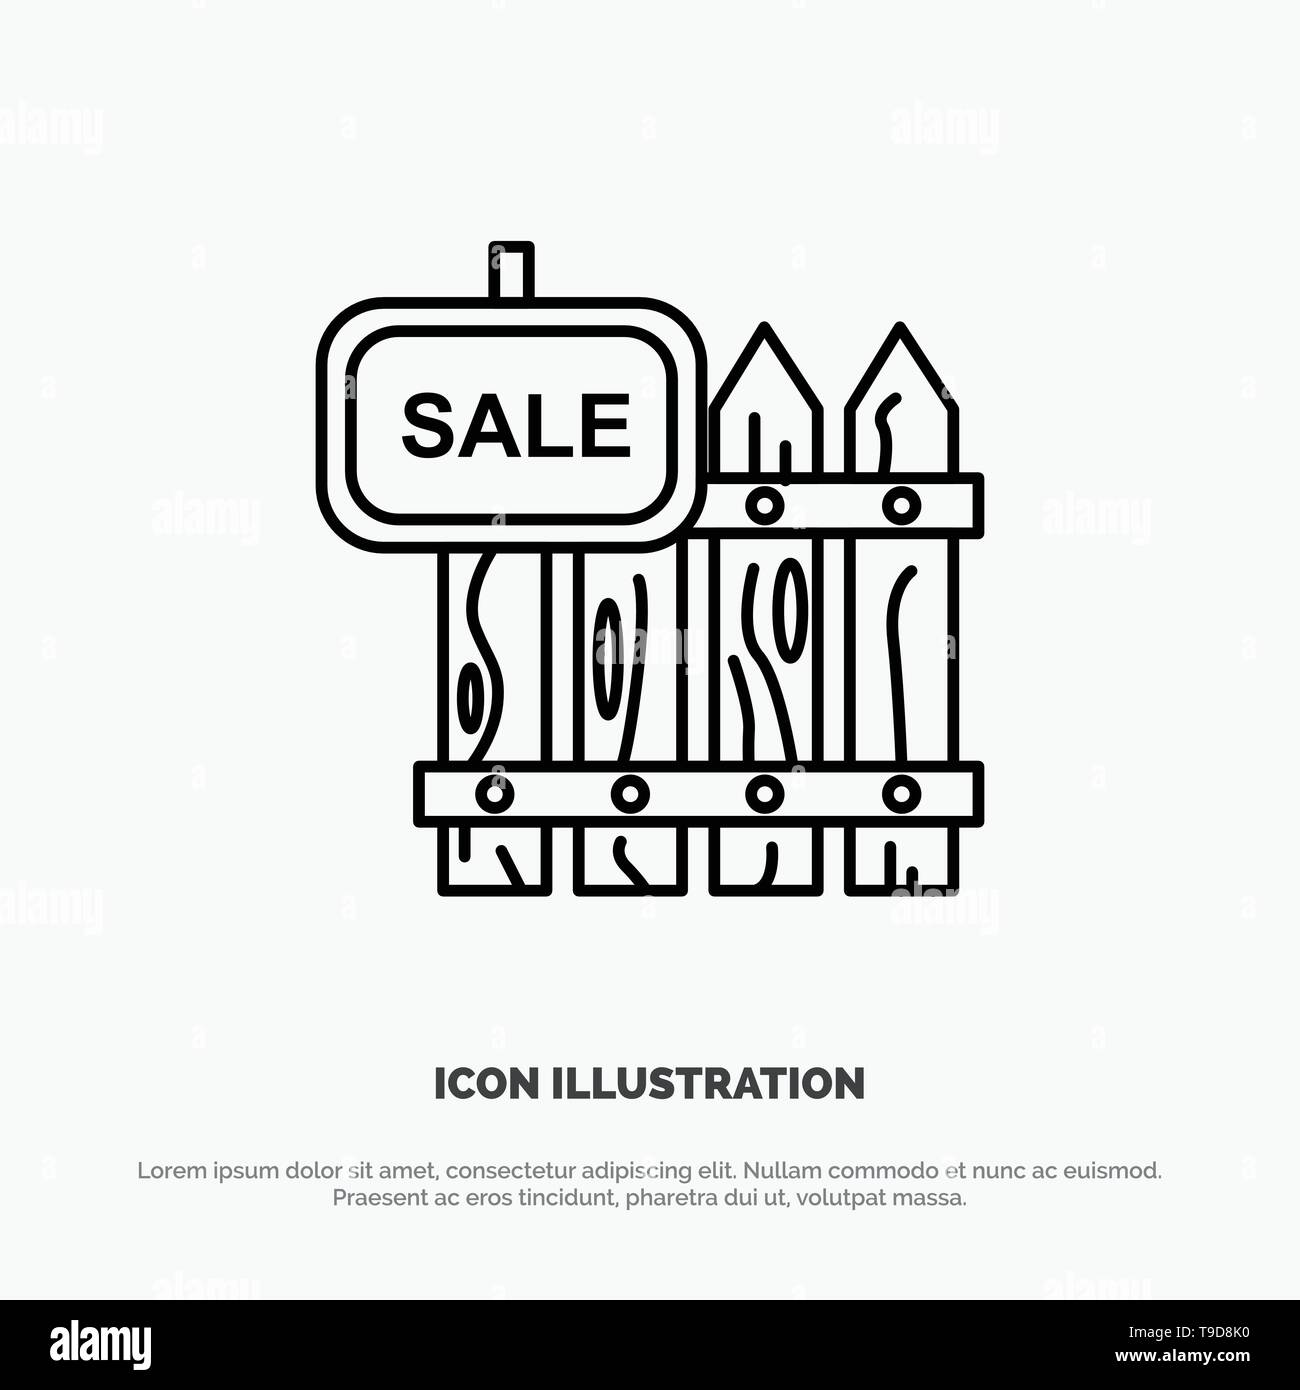 Fence, Wood, Realty, Sale, Garden, House Line Icon Vector Stock Vector